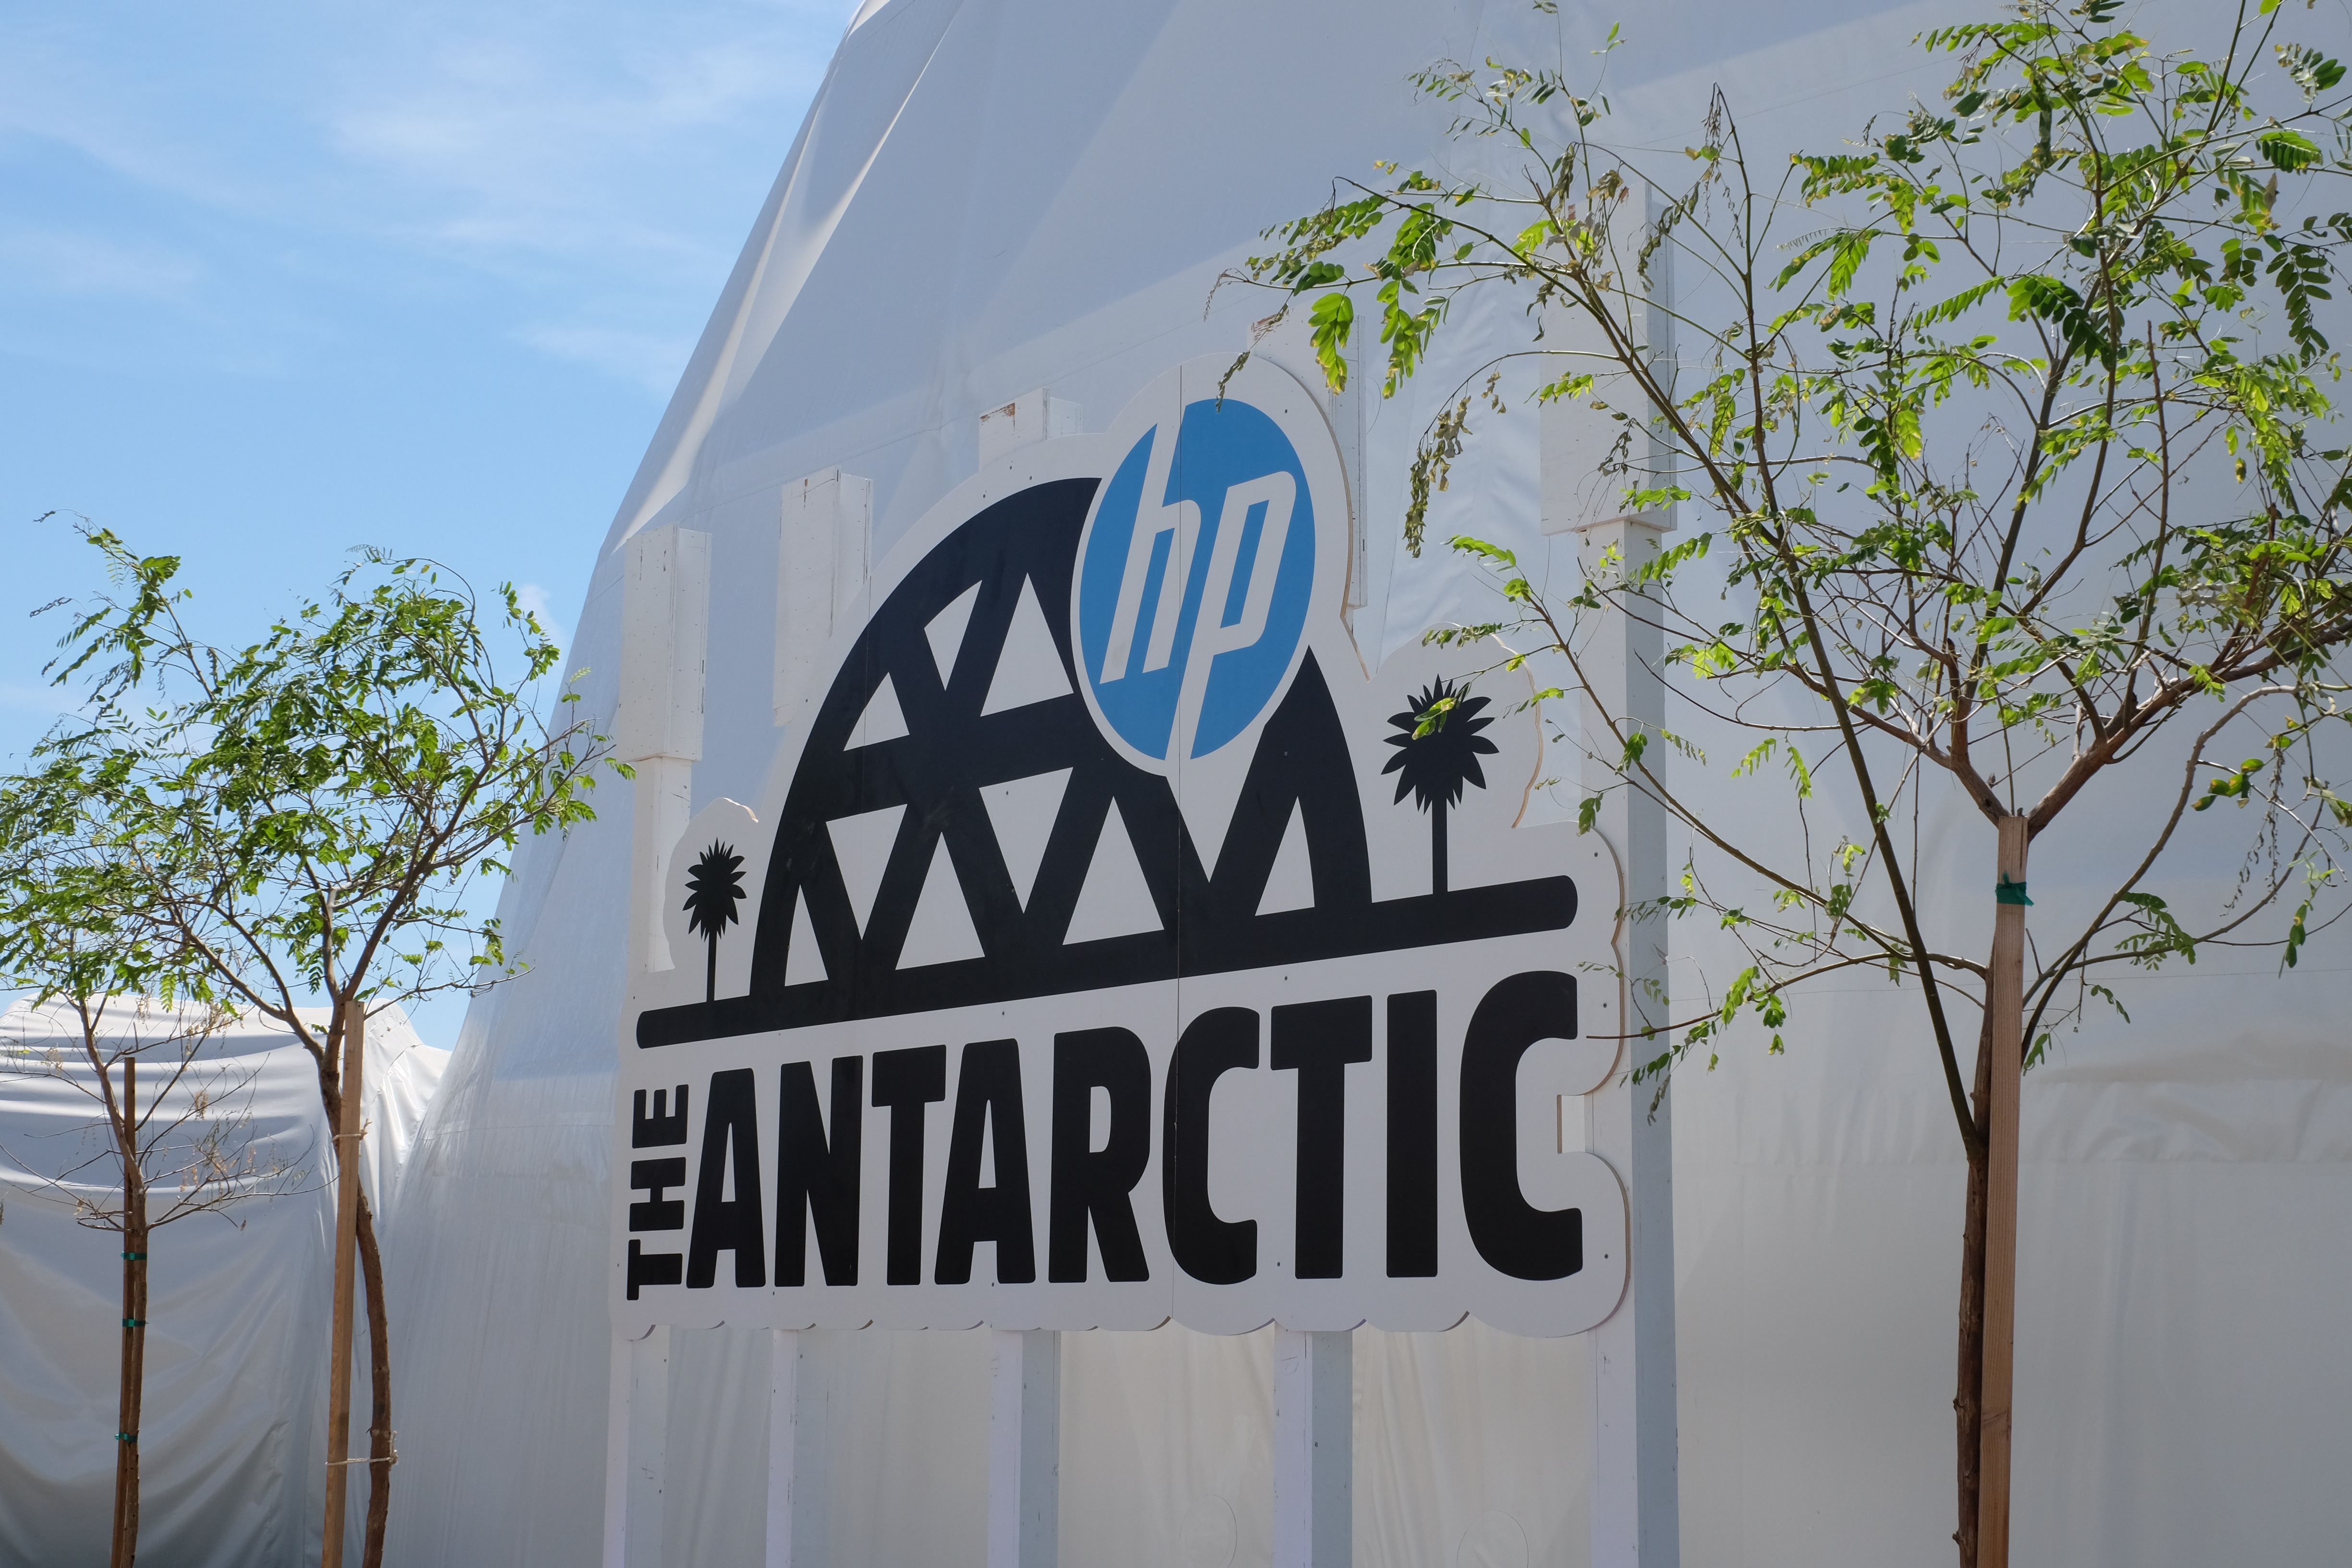 Signage outside a tent that says "The Antarctic" with the HP logo